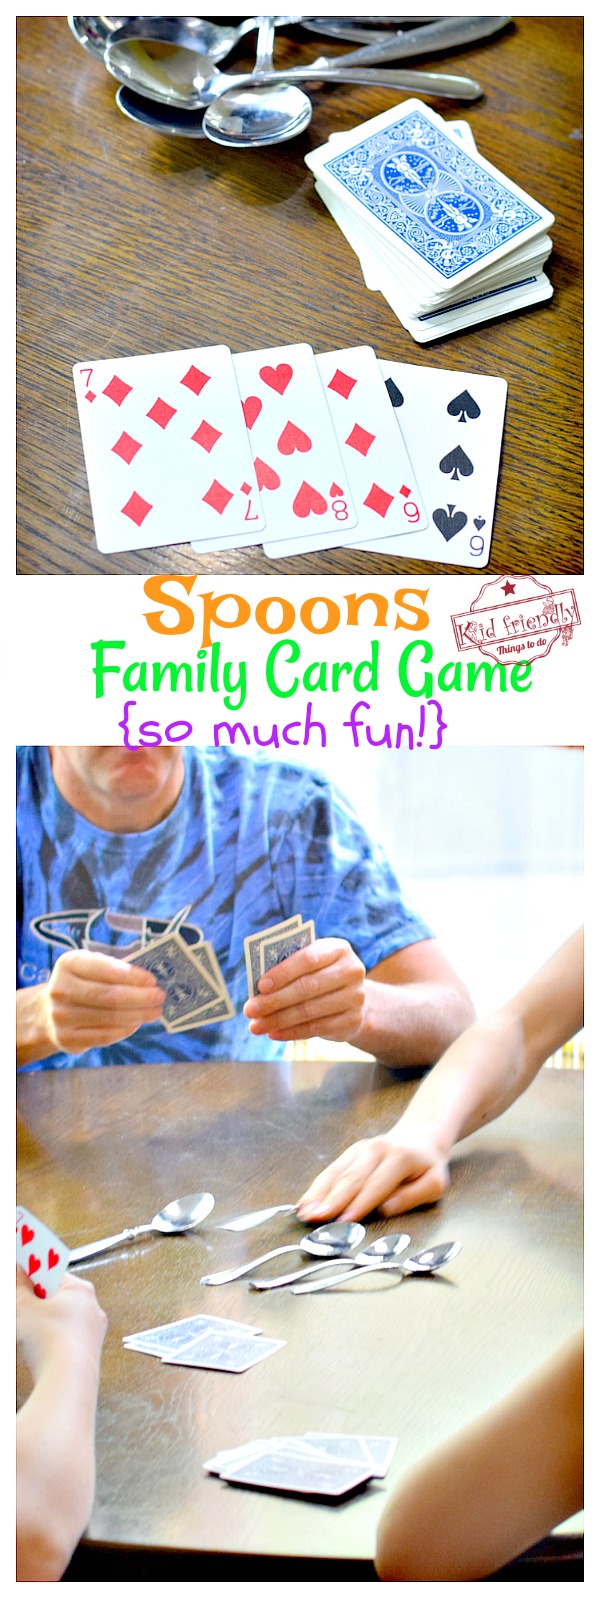 How To Play Spoons Card Game Fun For All Ages With Video Kid Friendly Things To Do,Travel Barbie